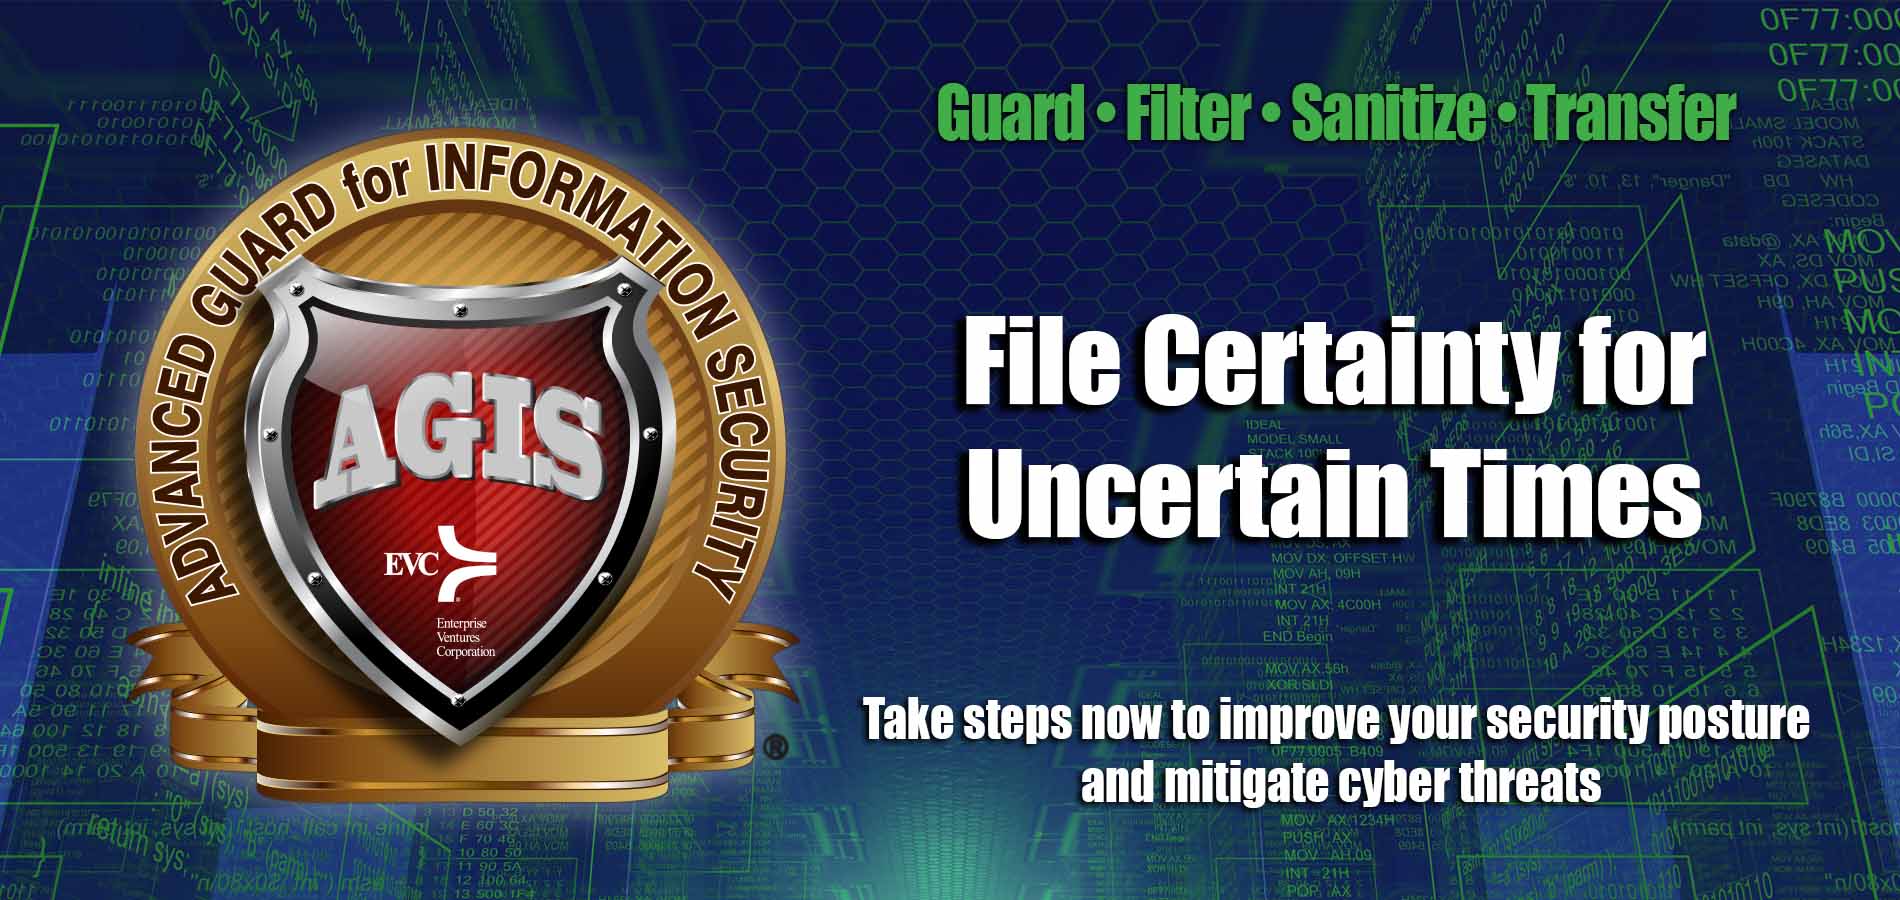 File Certainty for Uncertain Times. Take steps now to improve your security posture and mitigate cyber threats. Guard, Filter, Sanitize, Transfer. Advanced Guard for Information Security AGIS logo